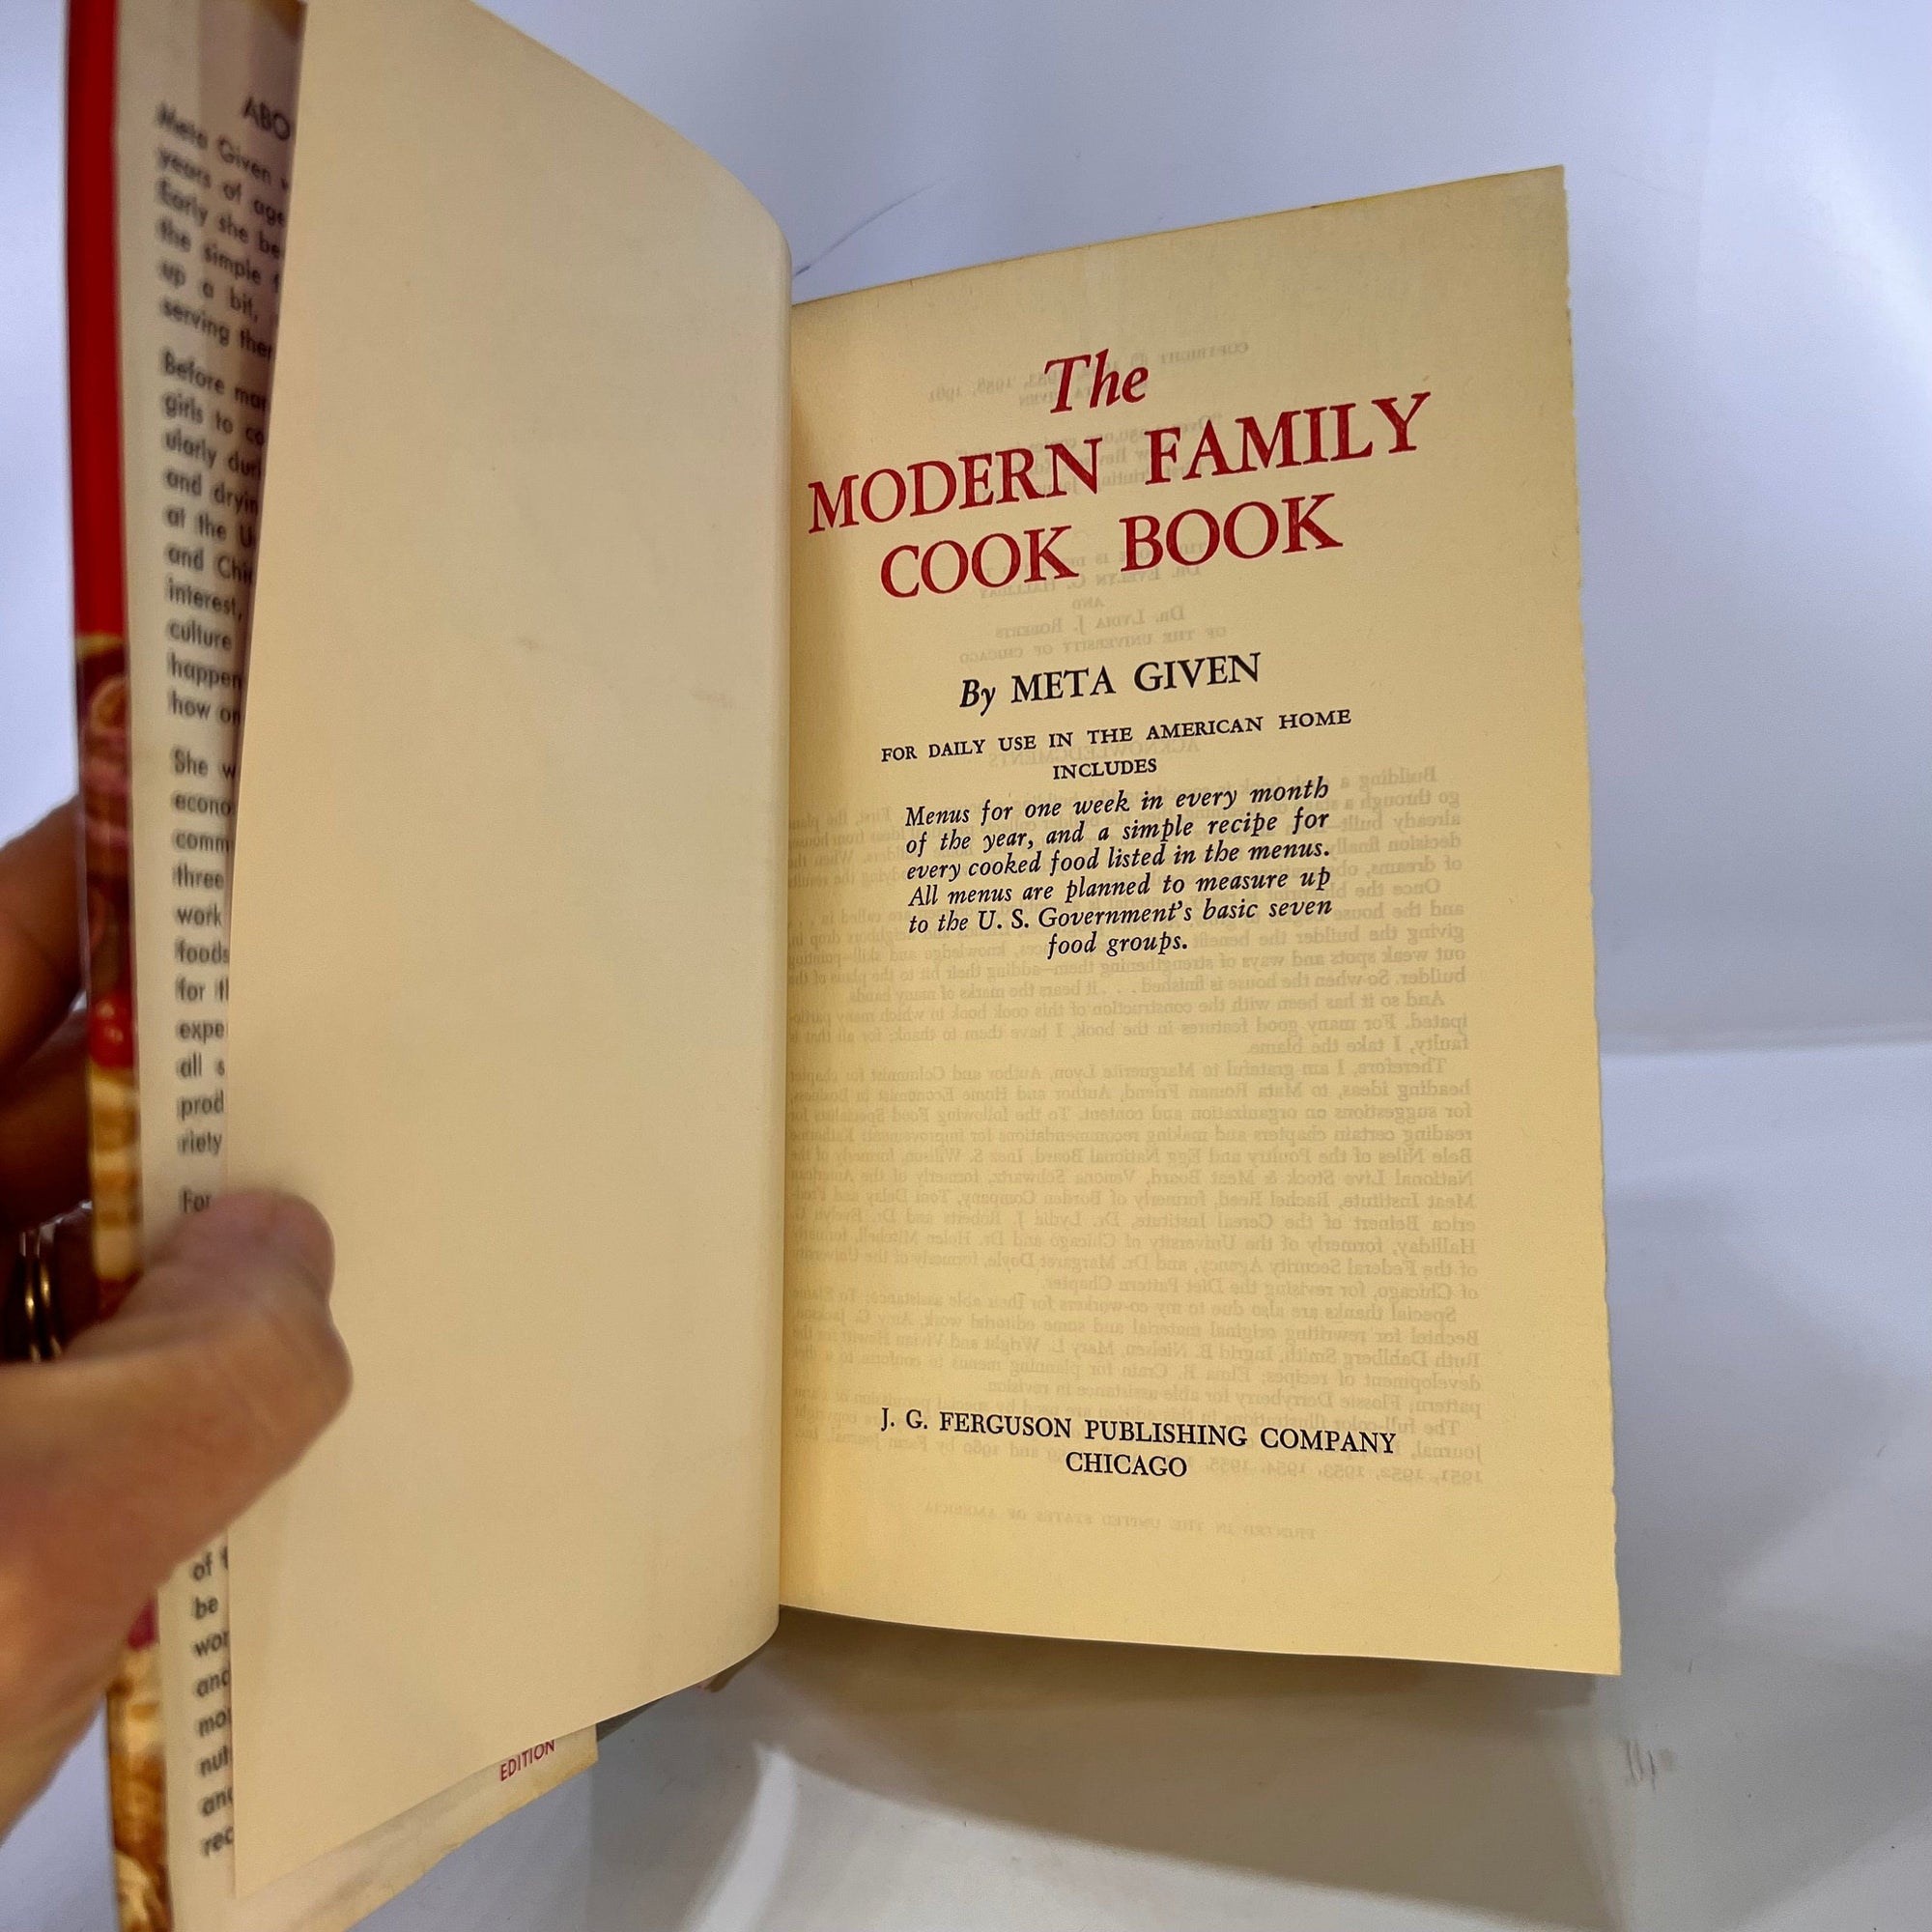 The Modern Family Cook Book by Meta Given 1961 J.G. Ferguson Publishing Comapany Vintage Book